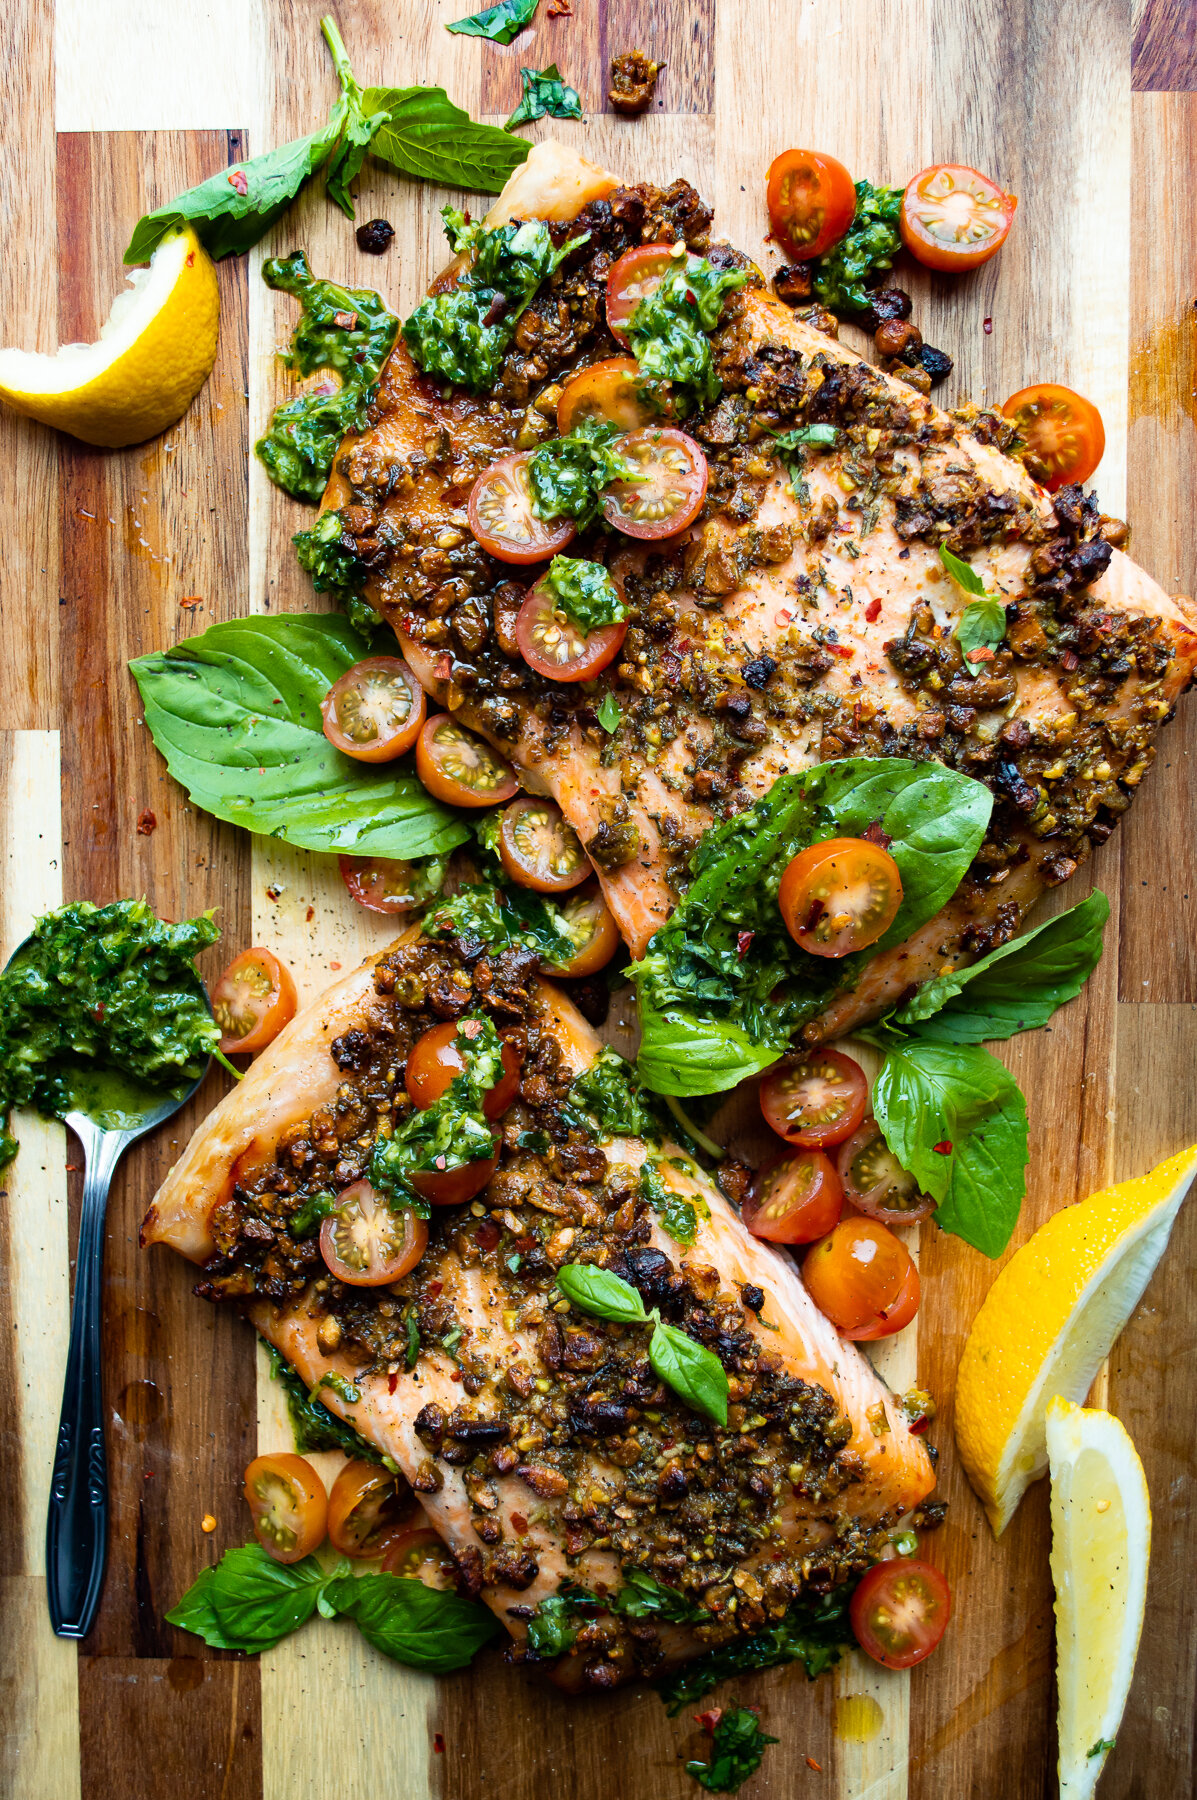 Pistachio Crusted Salmon with Basil Sauce — Inspired With A Twist